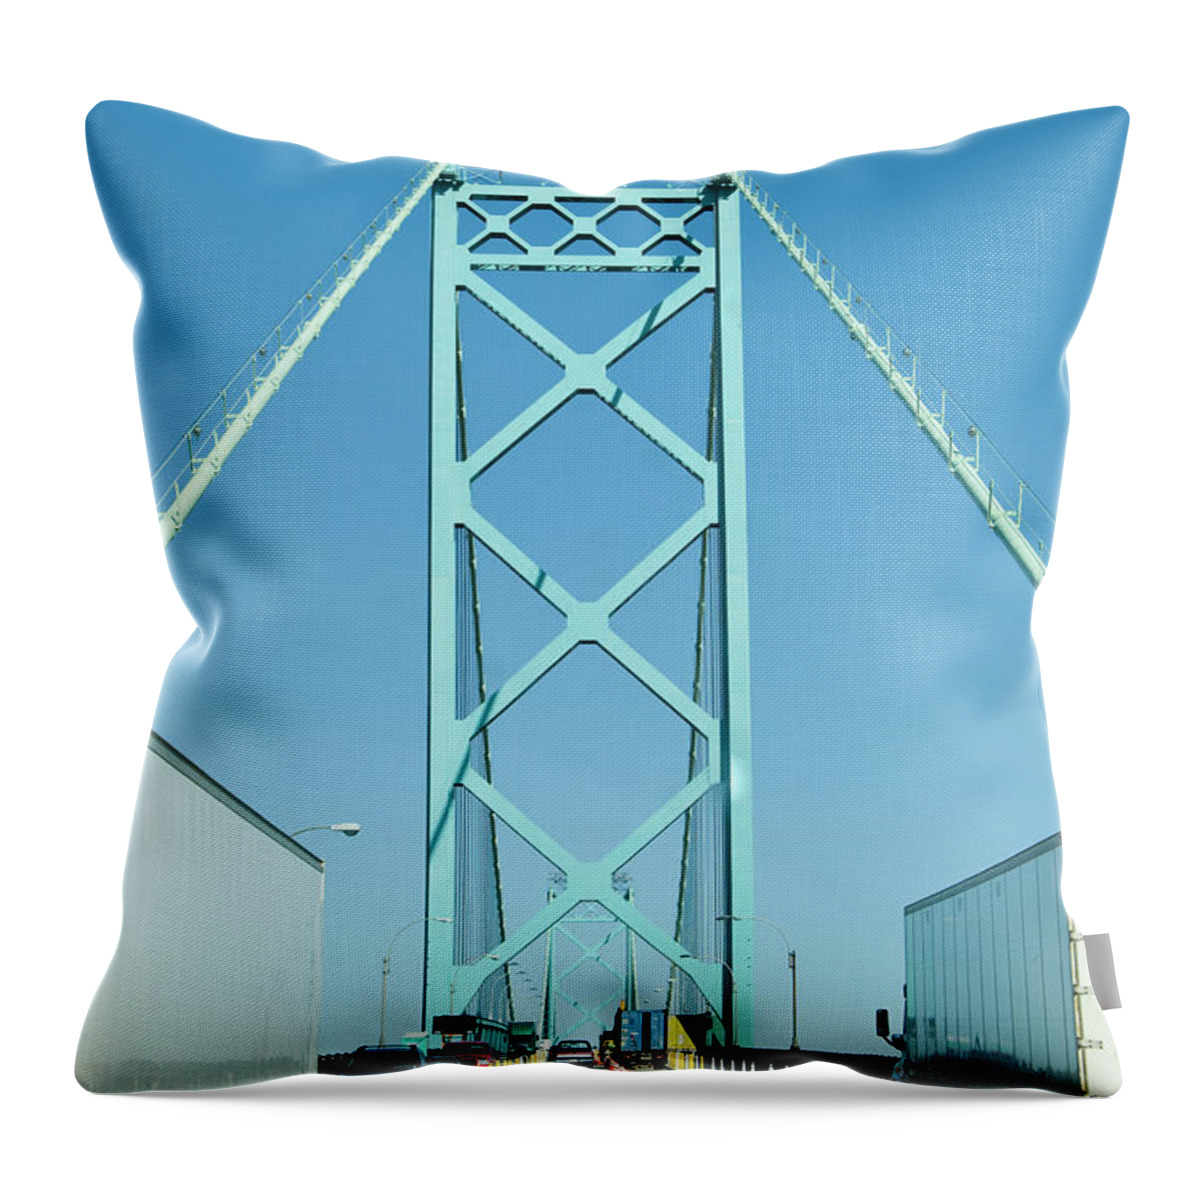 Bollard Throw Pillow featuring the photograph State Border To The Usa - Ambassador by Weible1980